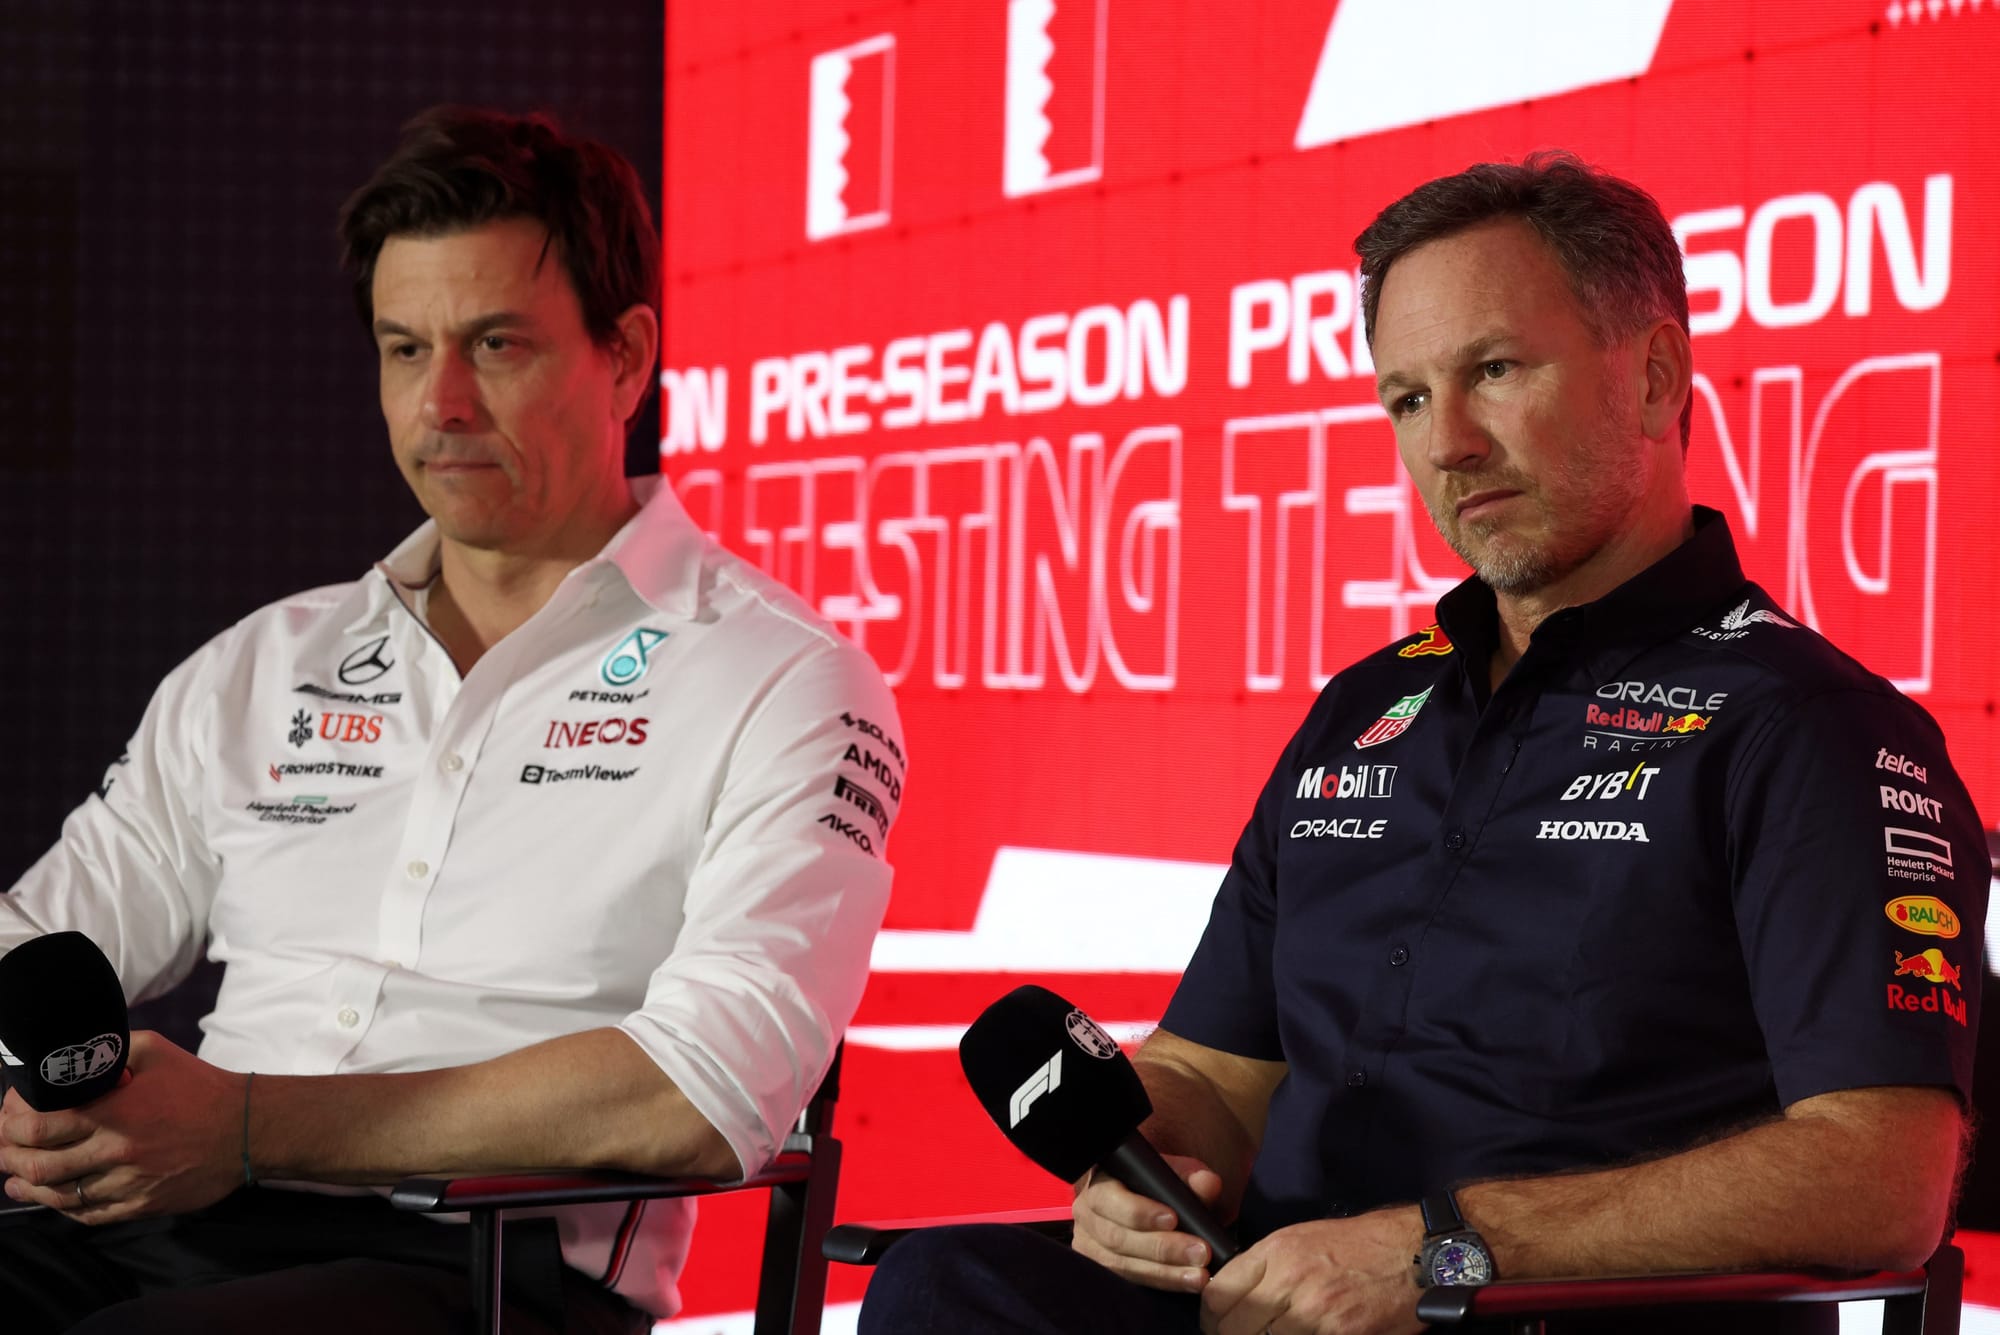 Toto Wolff, Mercedes, and Christian Horner, Red Bull, F1